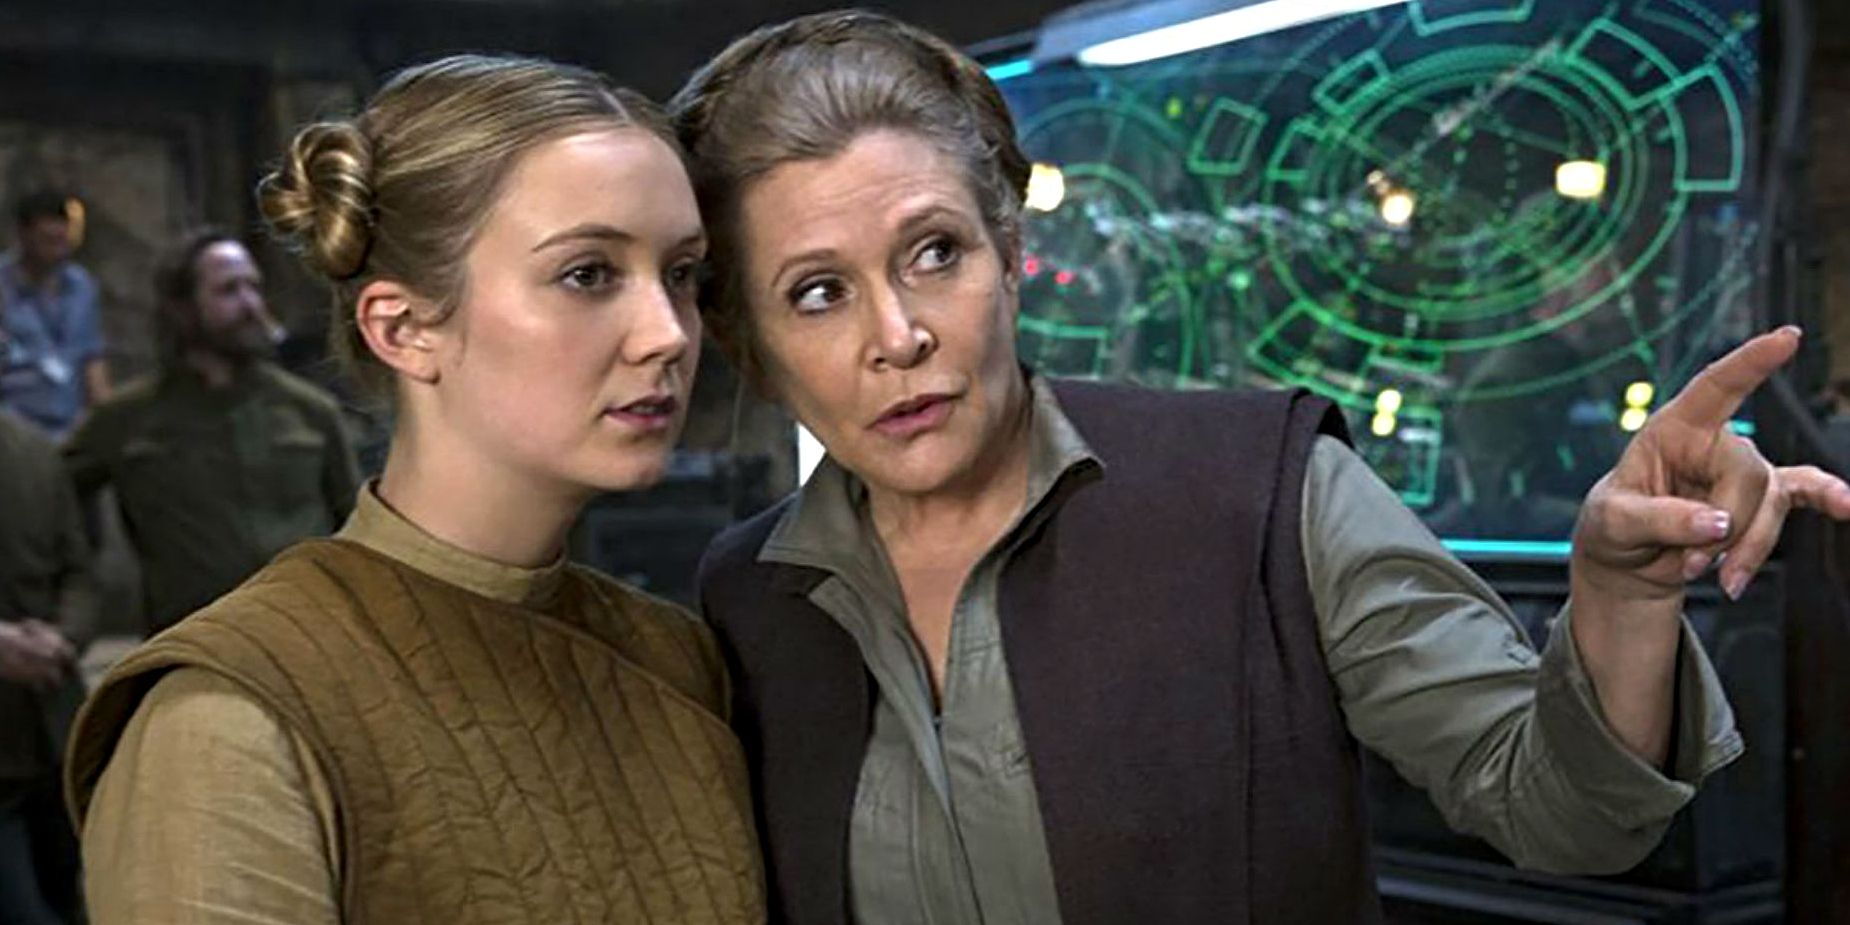 Carrie Fisher and Billie Lourd on a Star Wars movie set